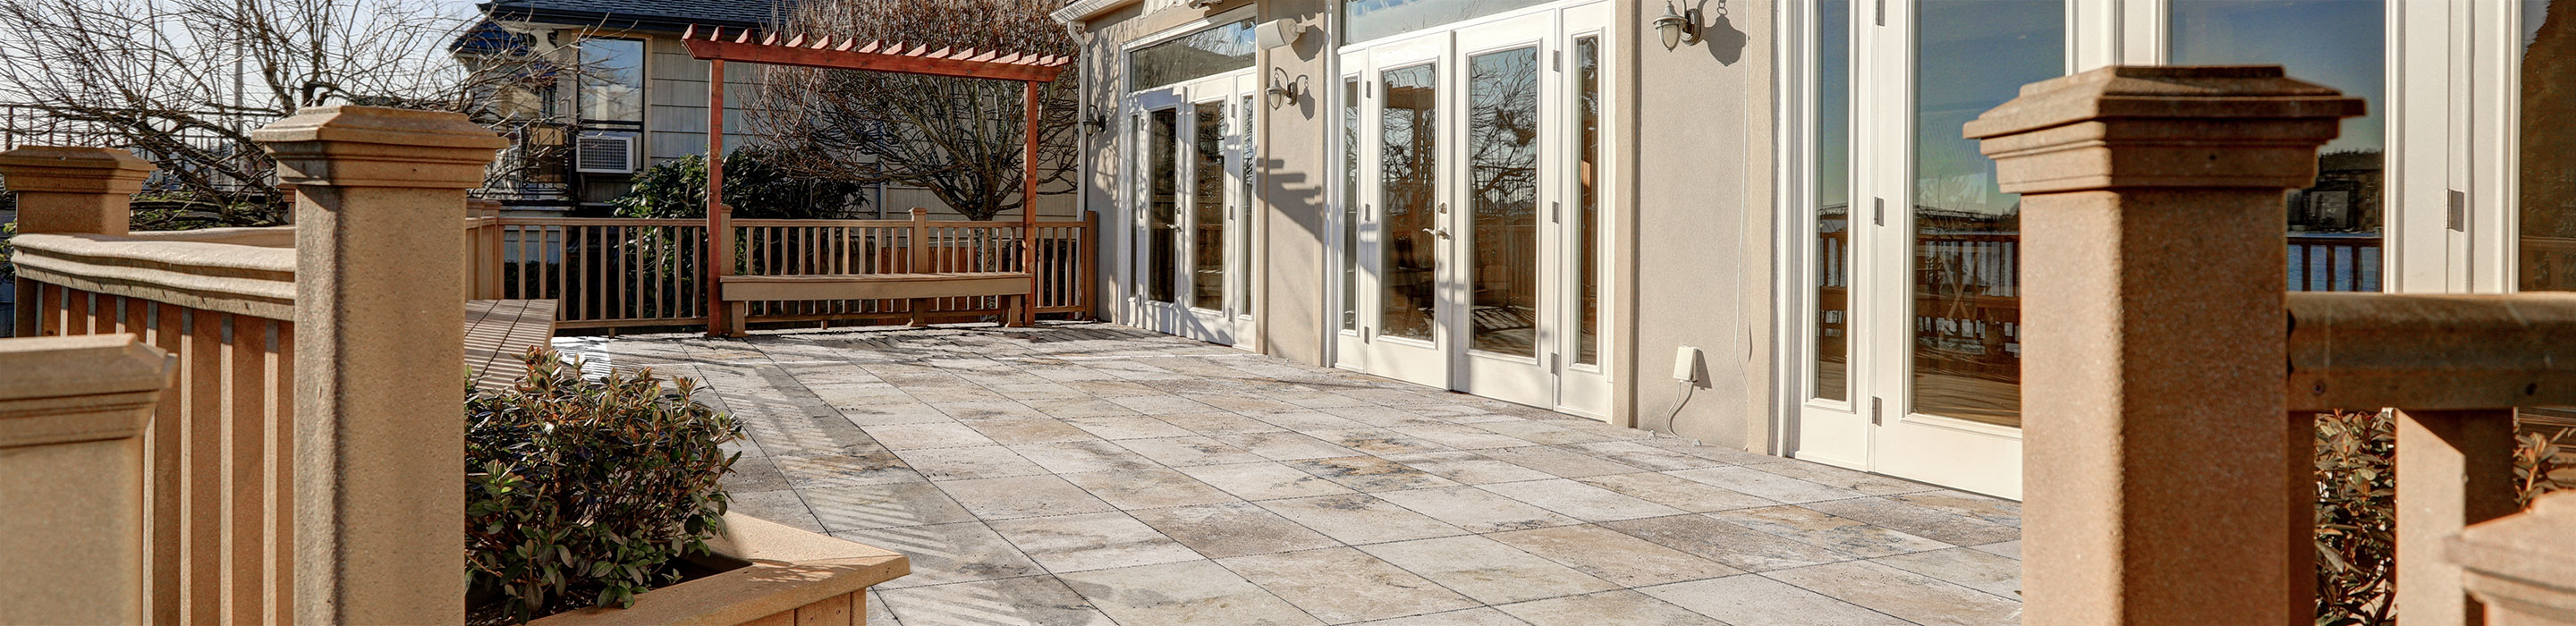 Country Classic Paver